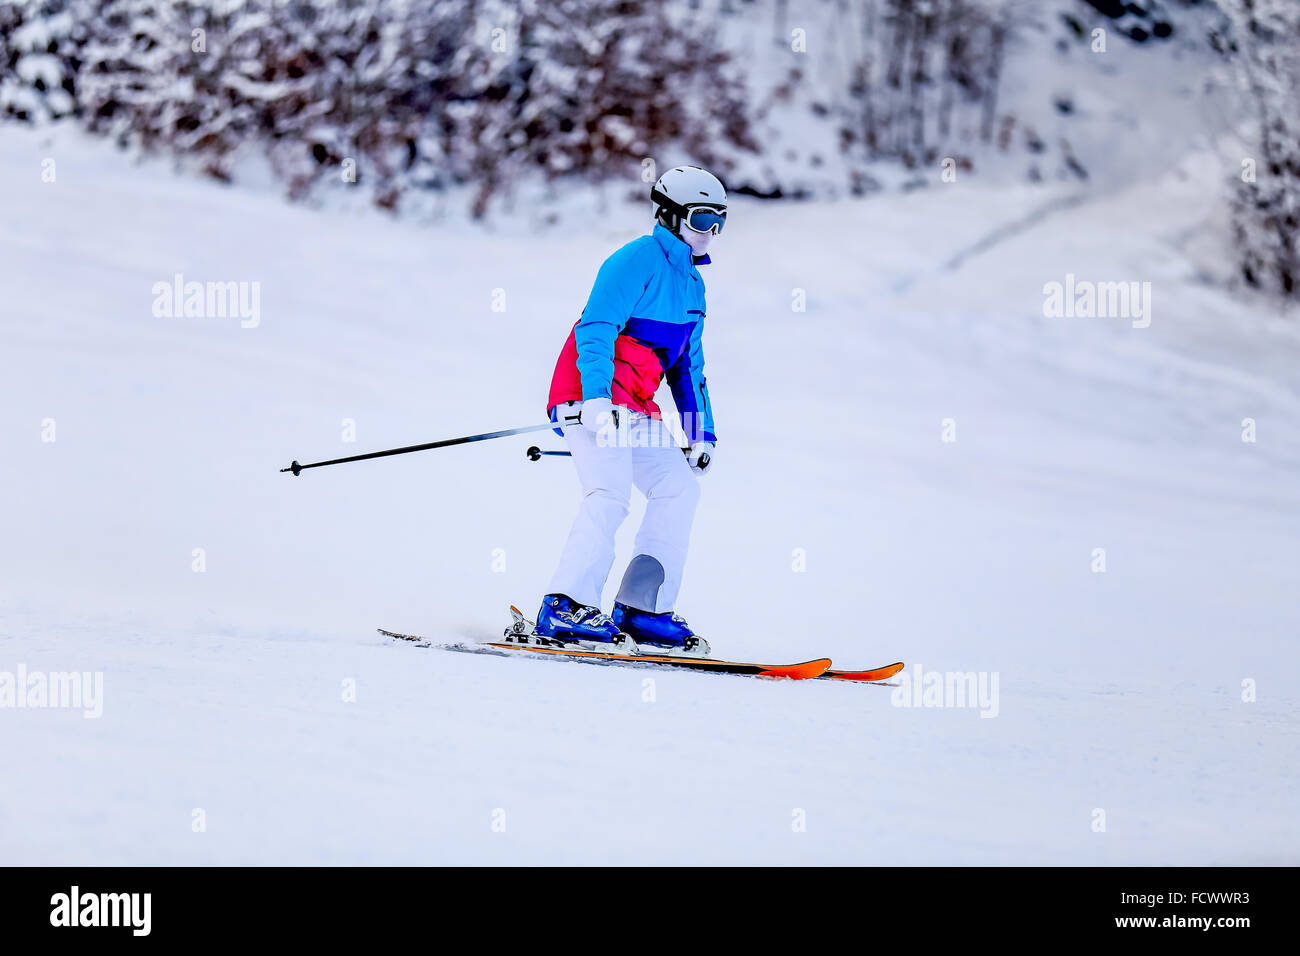 Woman in white skiing suit on mountain slope Stock Photo